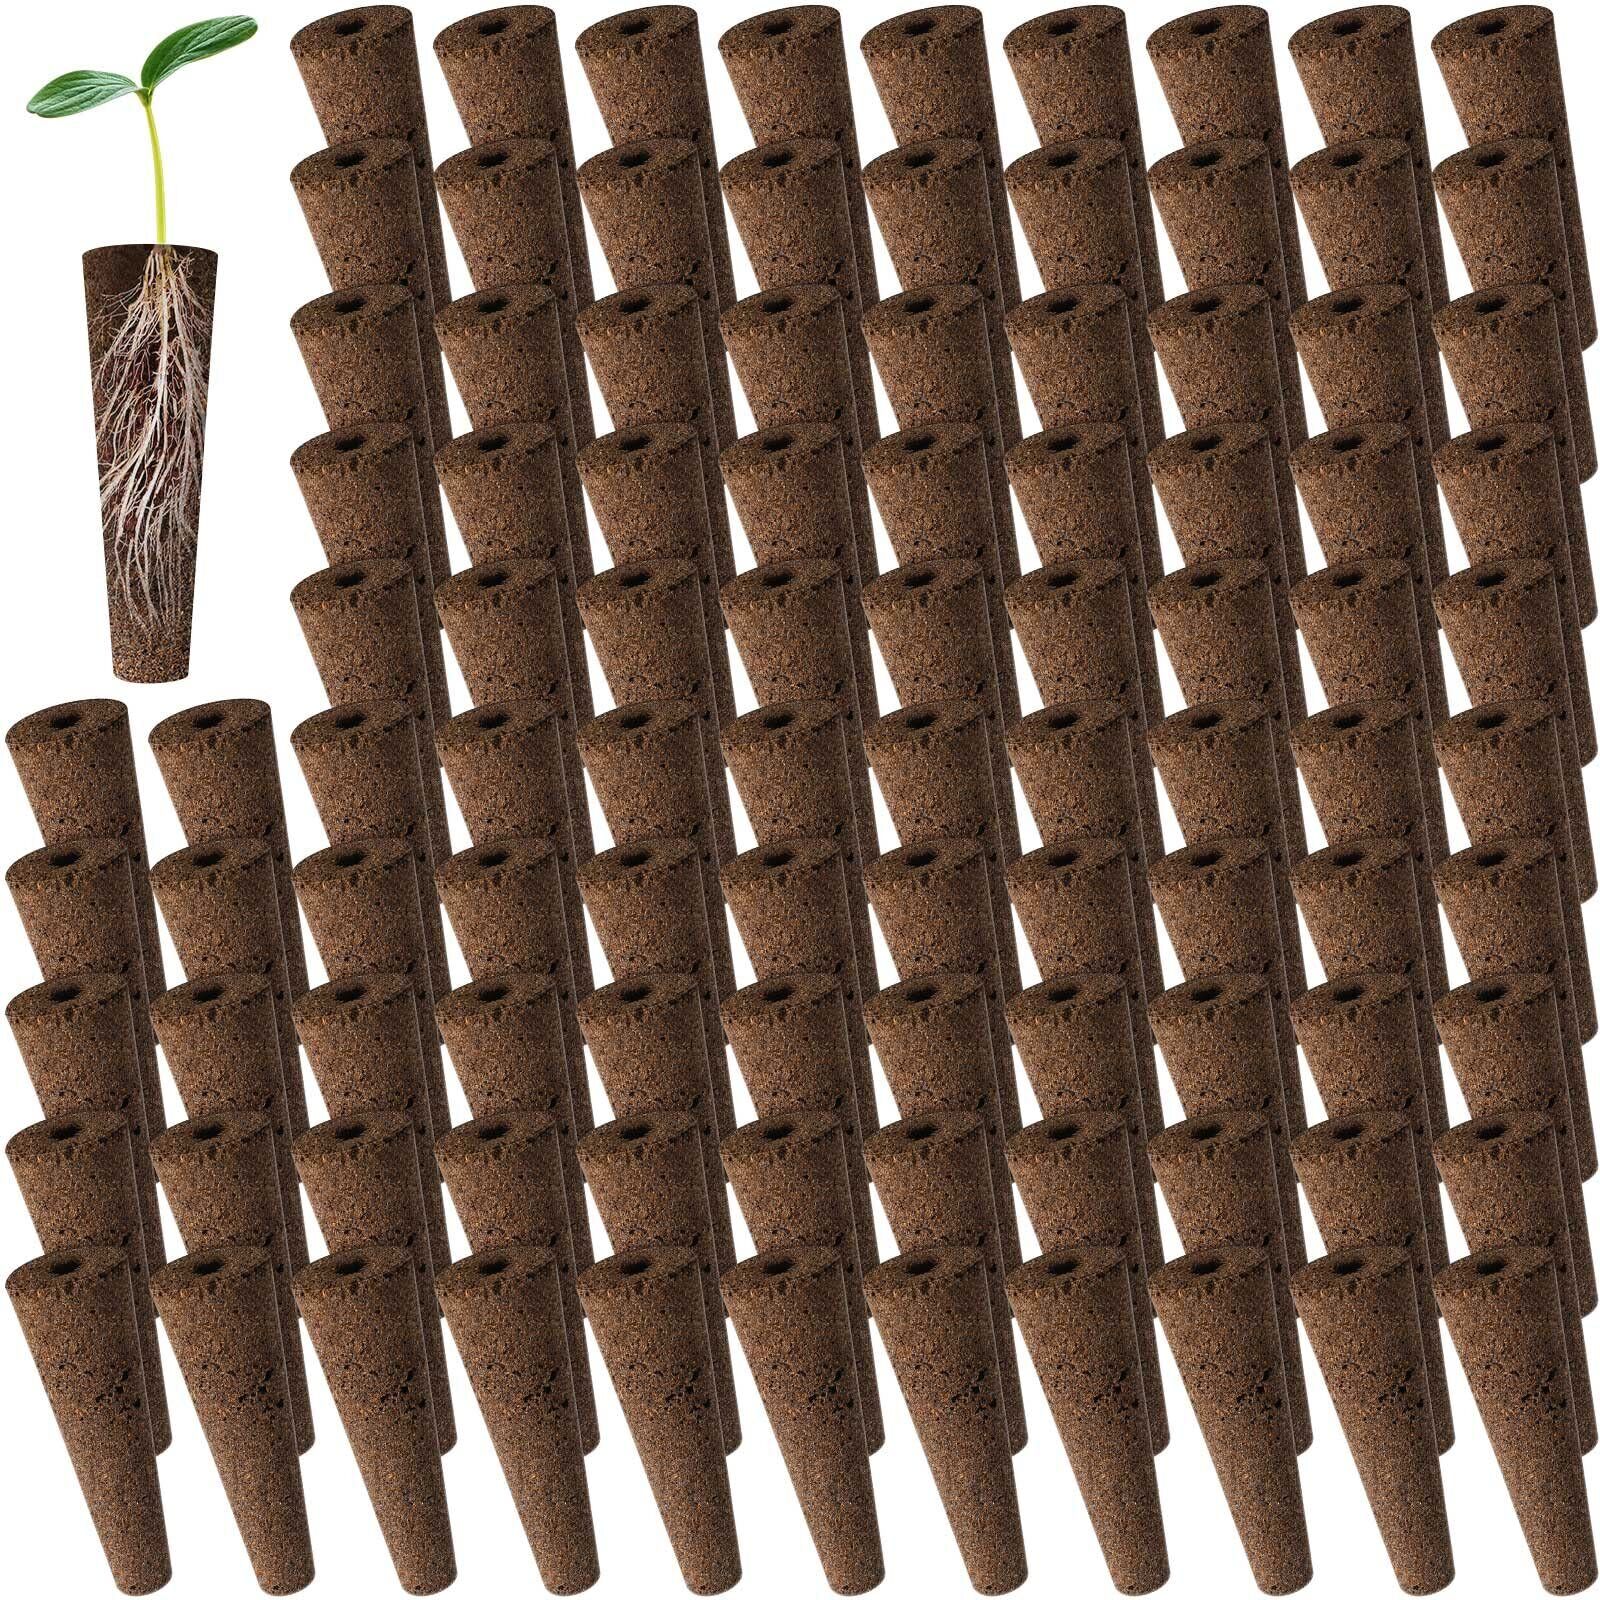 800 Pieces Hydroponic Sponges Bulk Garden Seed Starter Pods Replacement Root ...